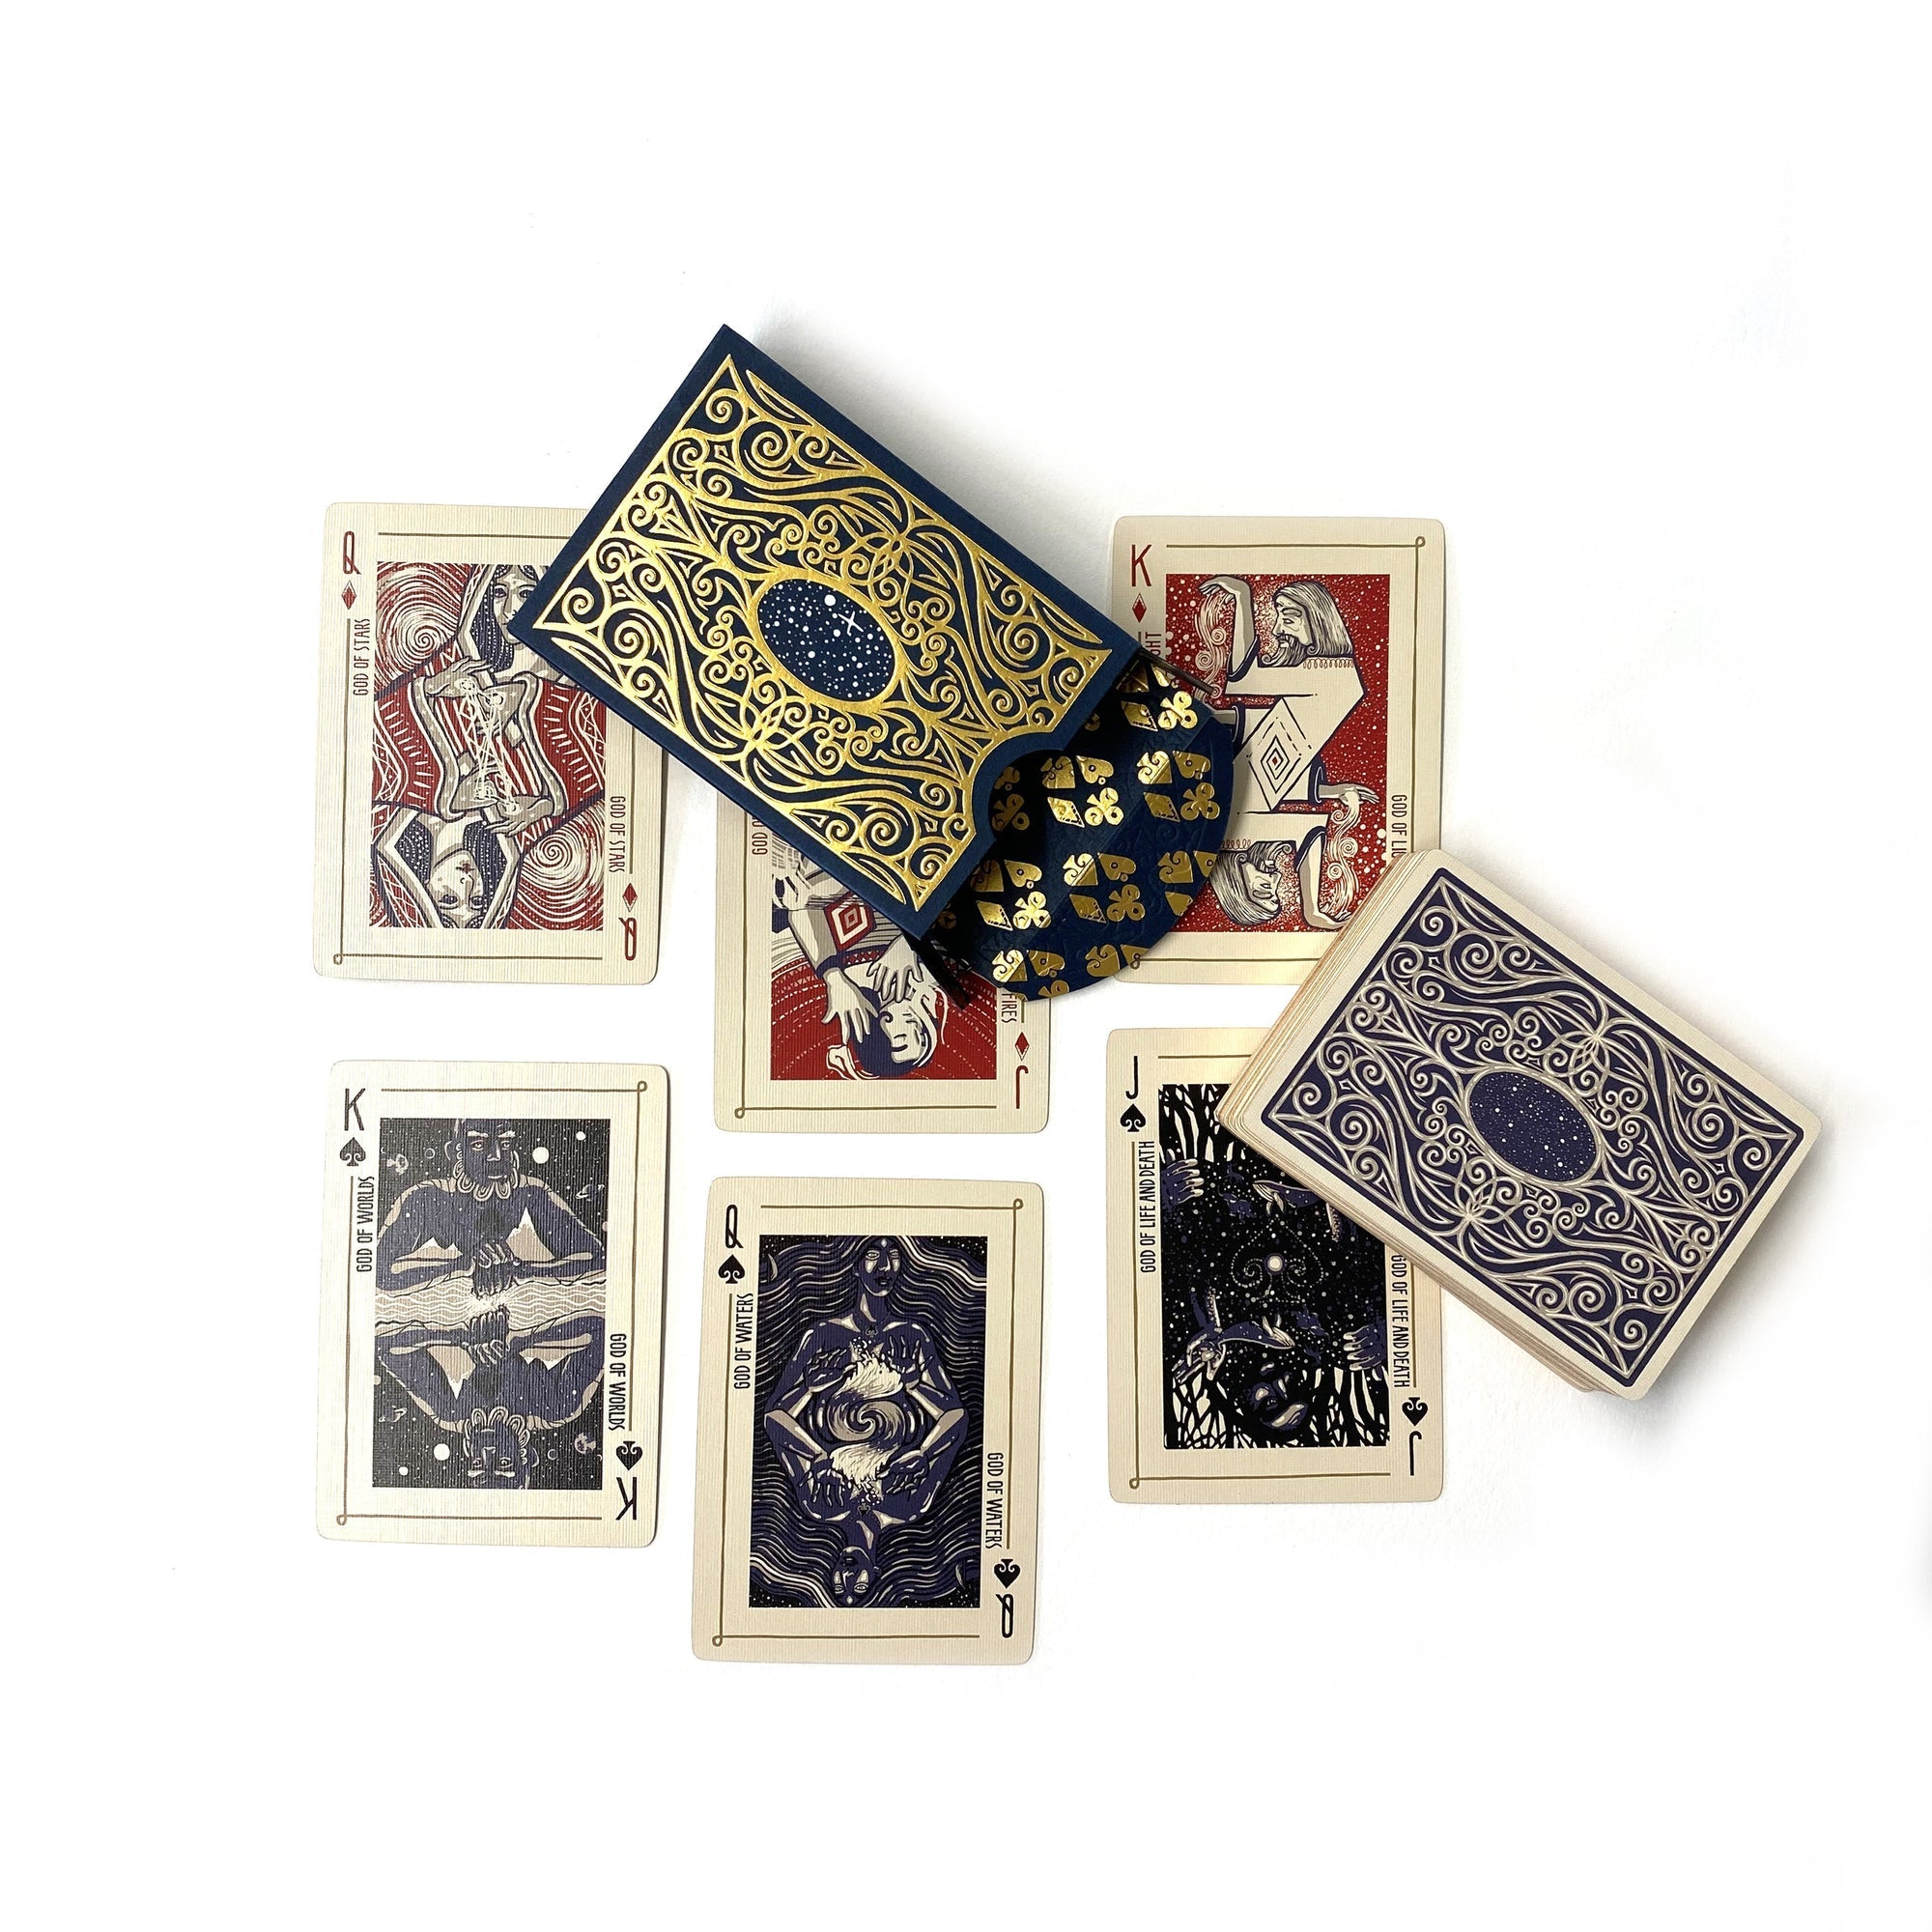 Open Portals Playing cards Playing Cards